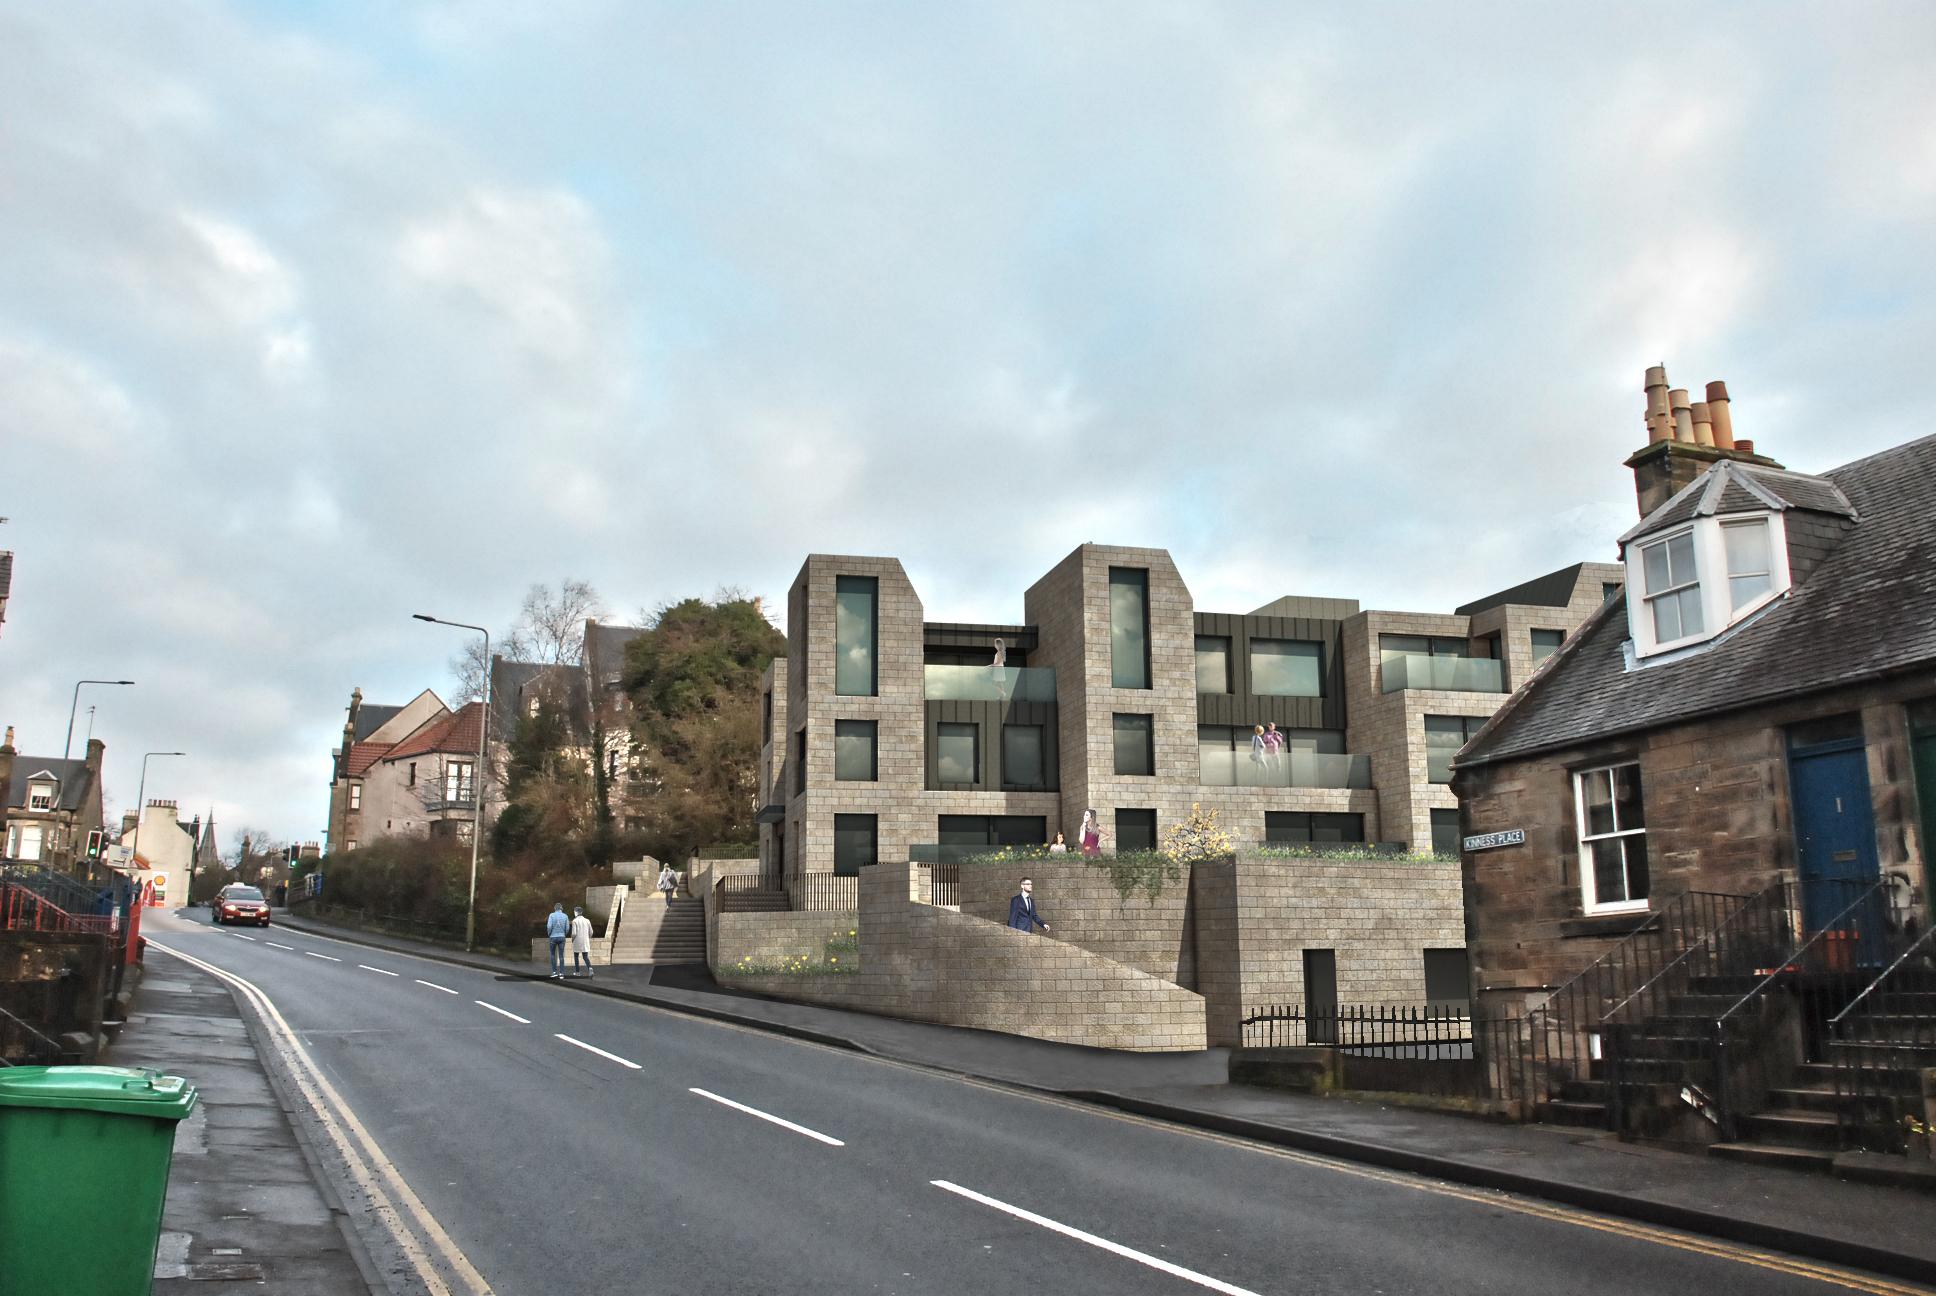 An artist's impression of how the proposed apartments could look.